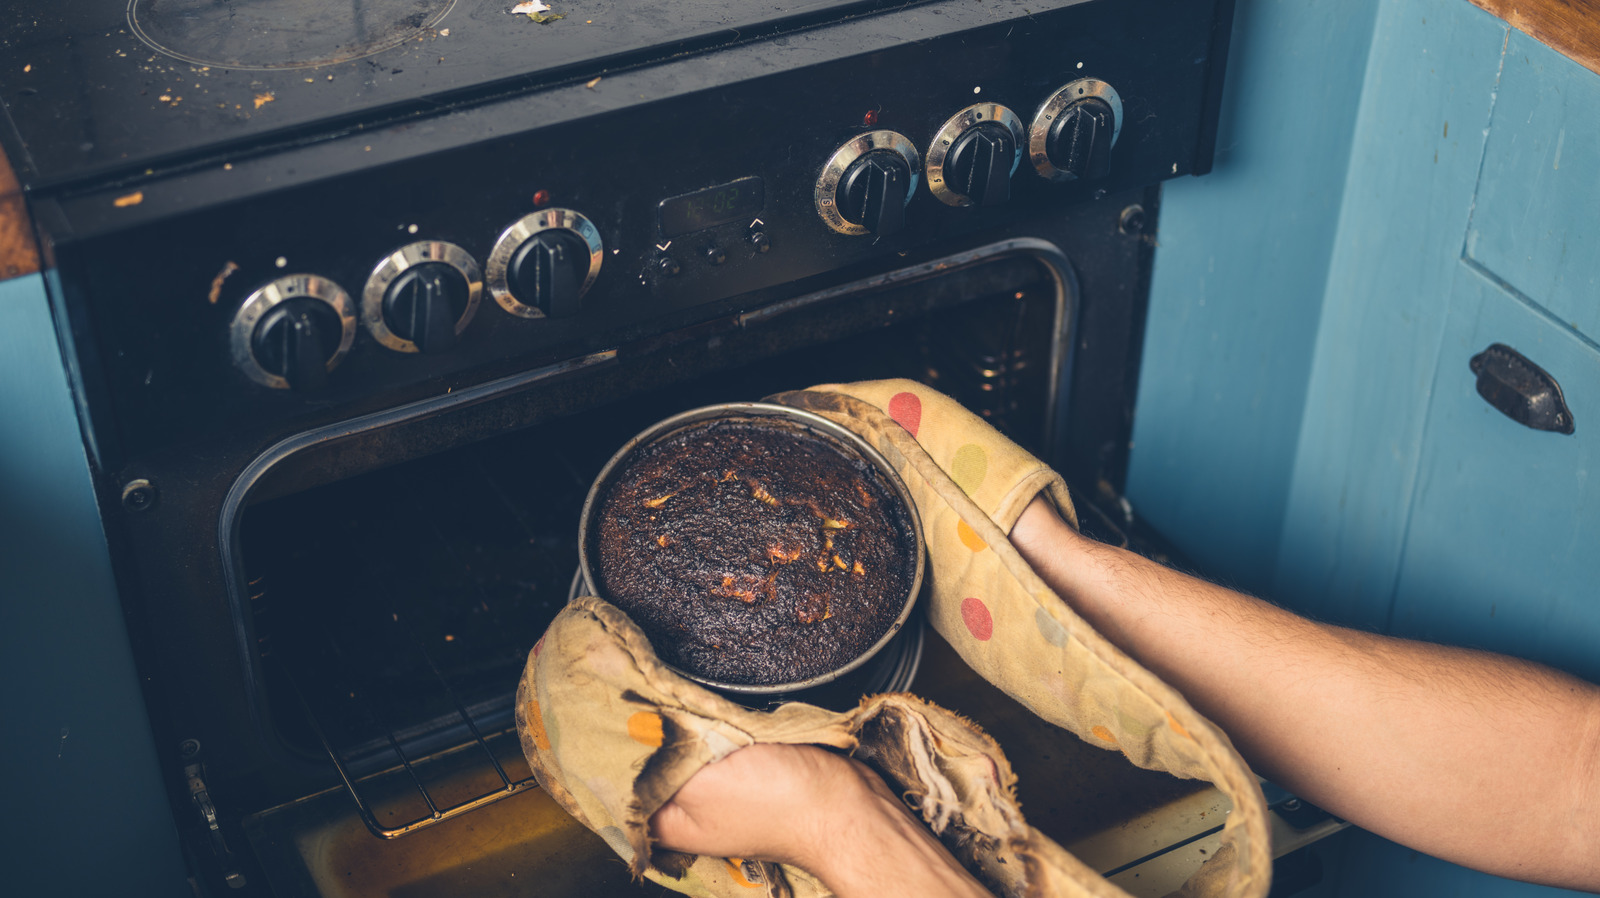 Do You Really Need to Preheat the Oven? We Asked the Experts